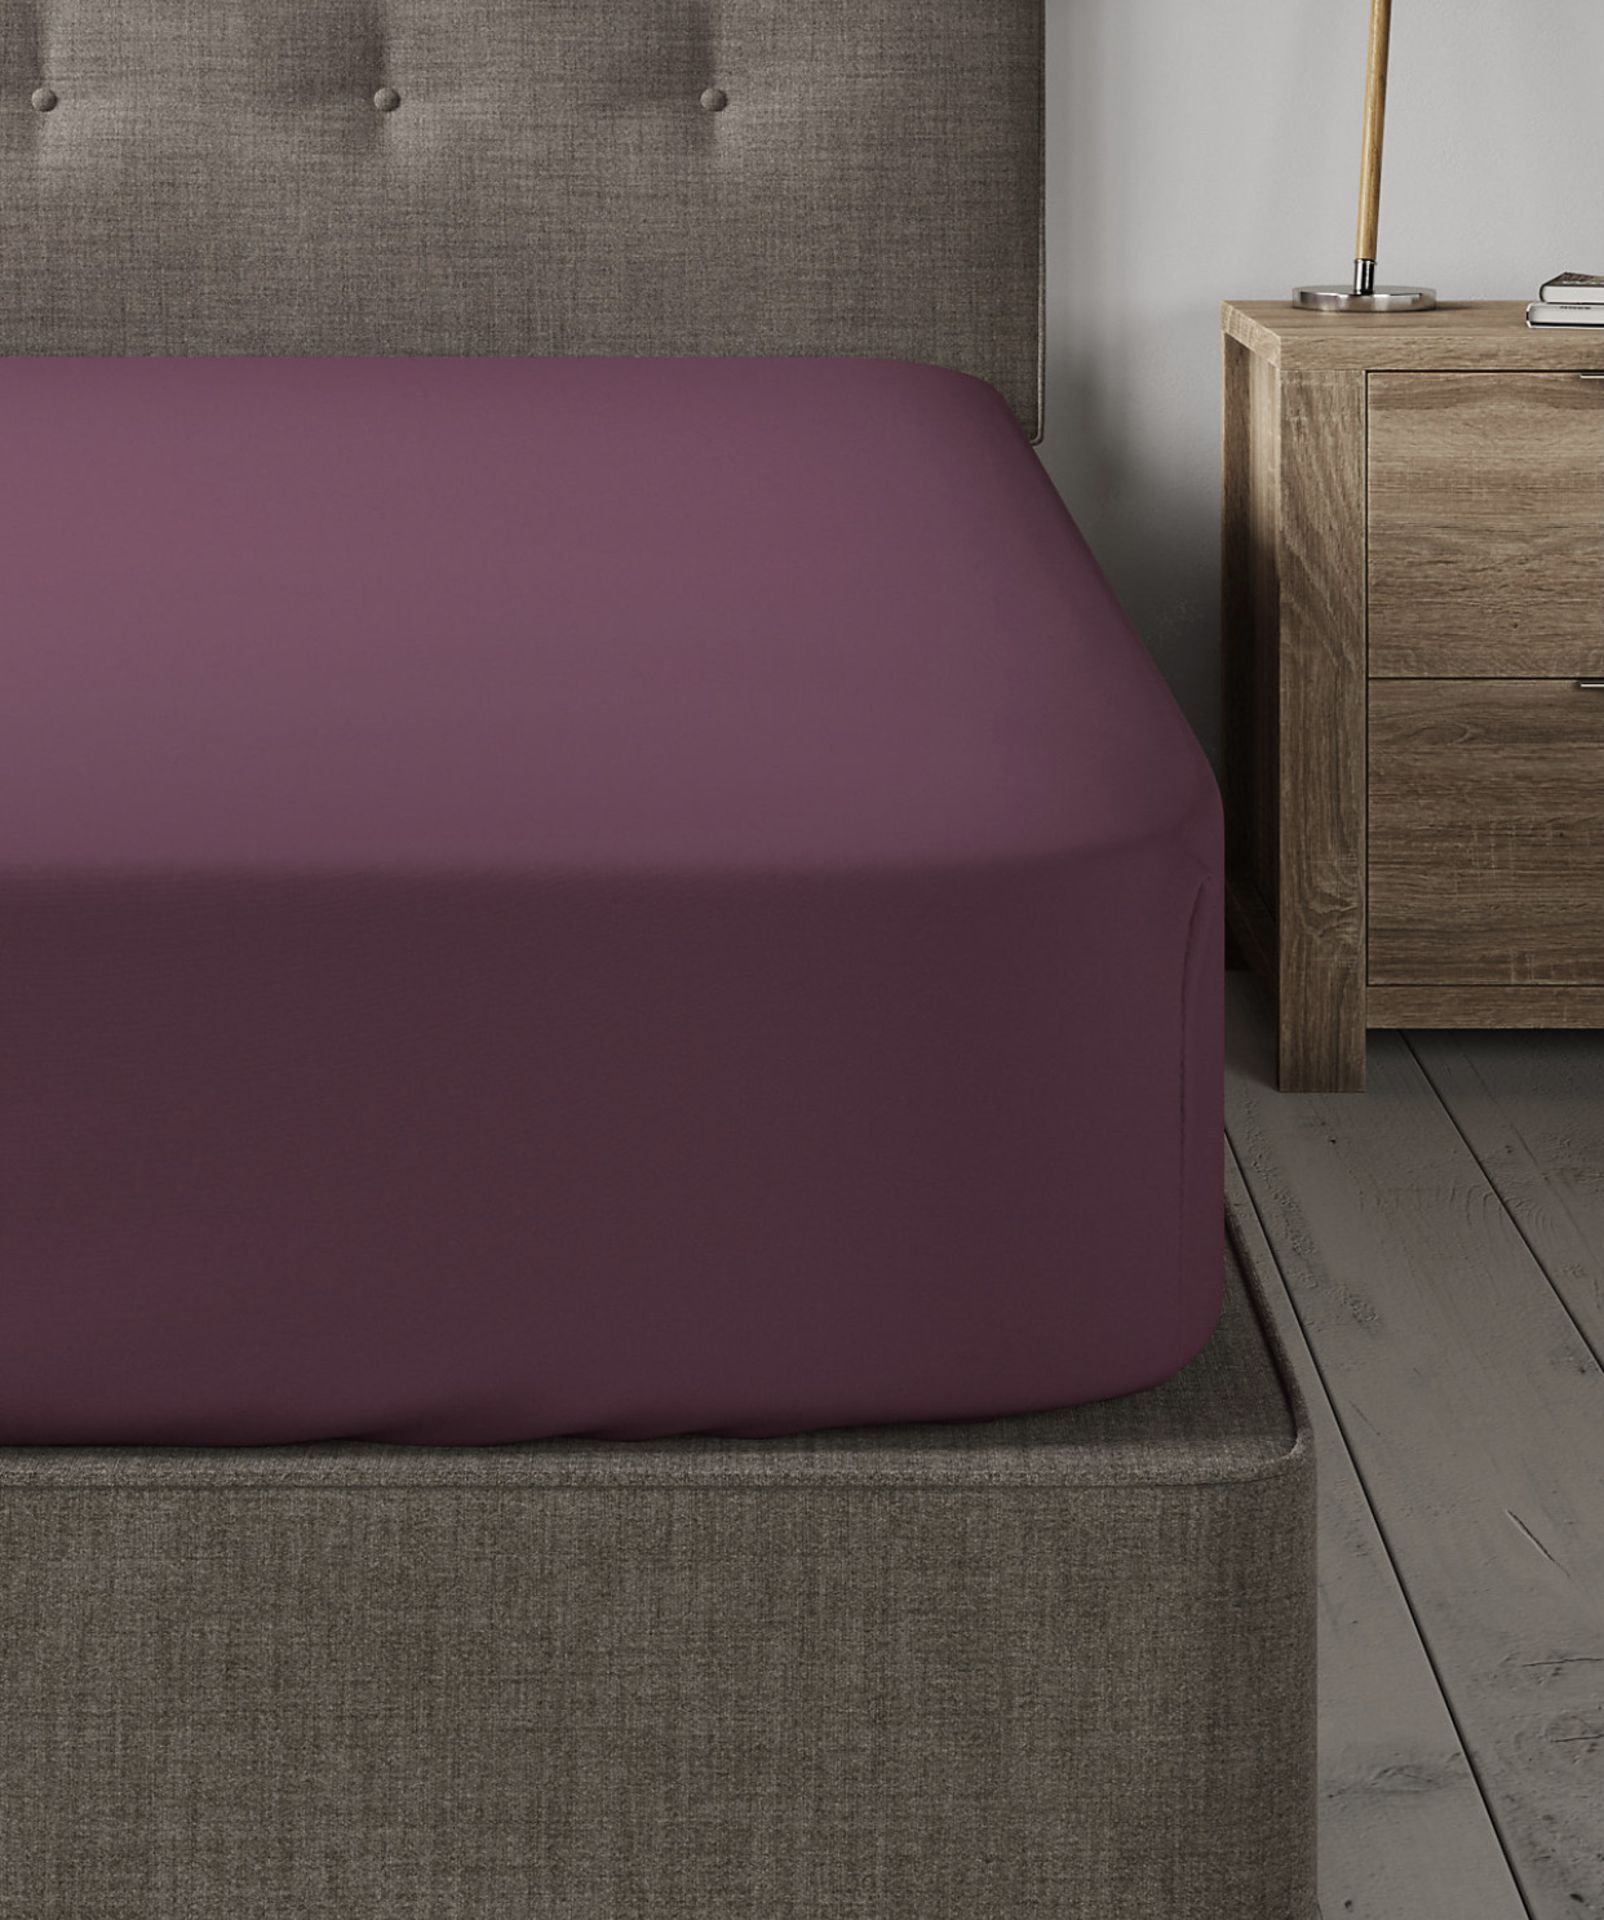 Luxury Egyptian Cotton 230 Thread Count Deep Fitted Sheet, King Size RRP £27.50